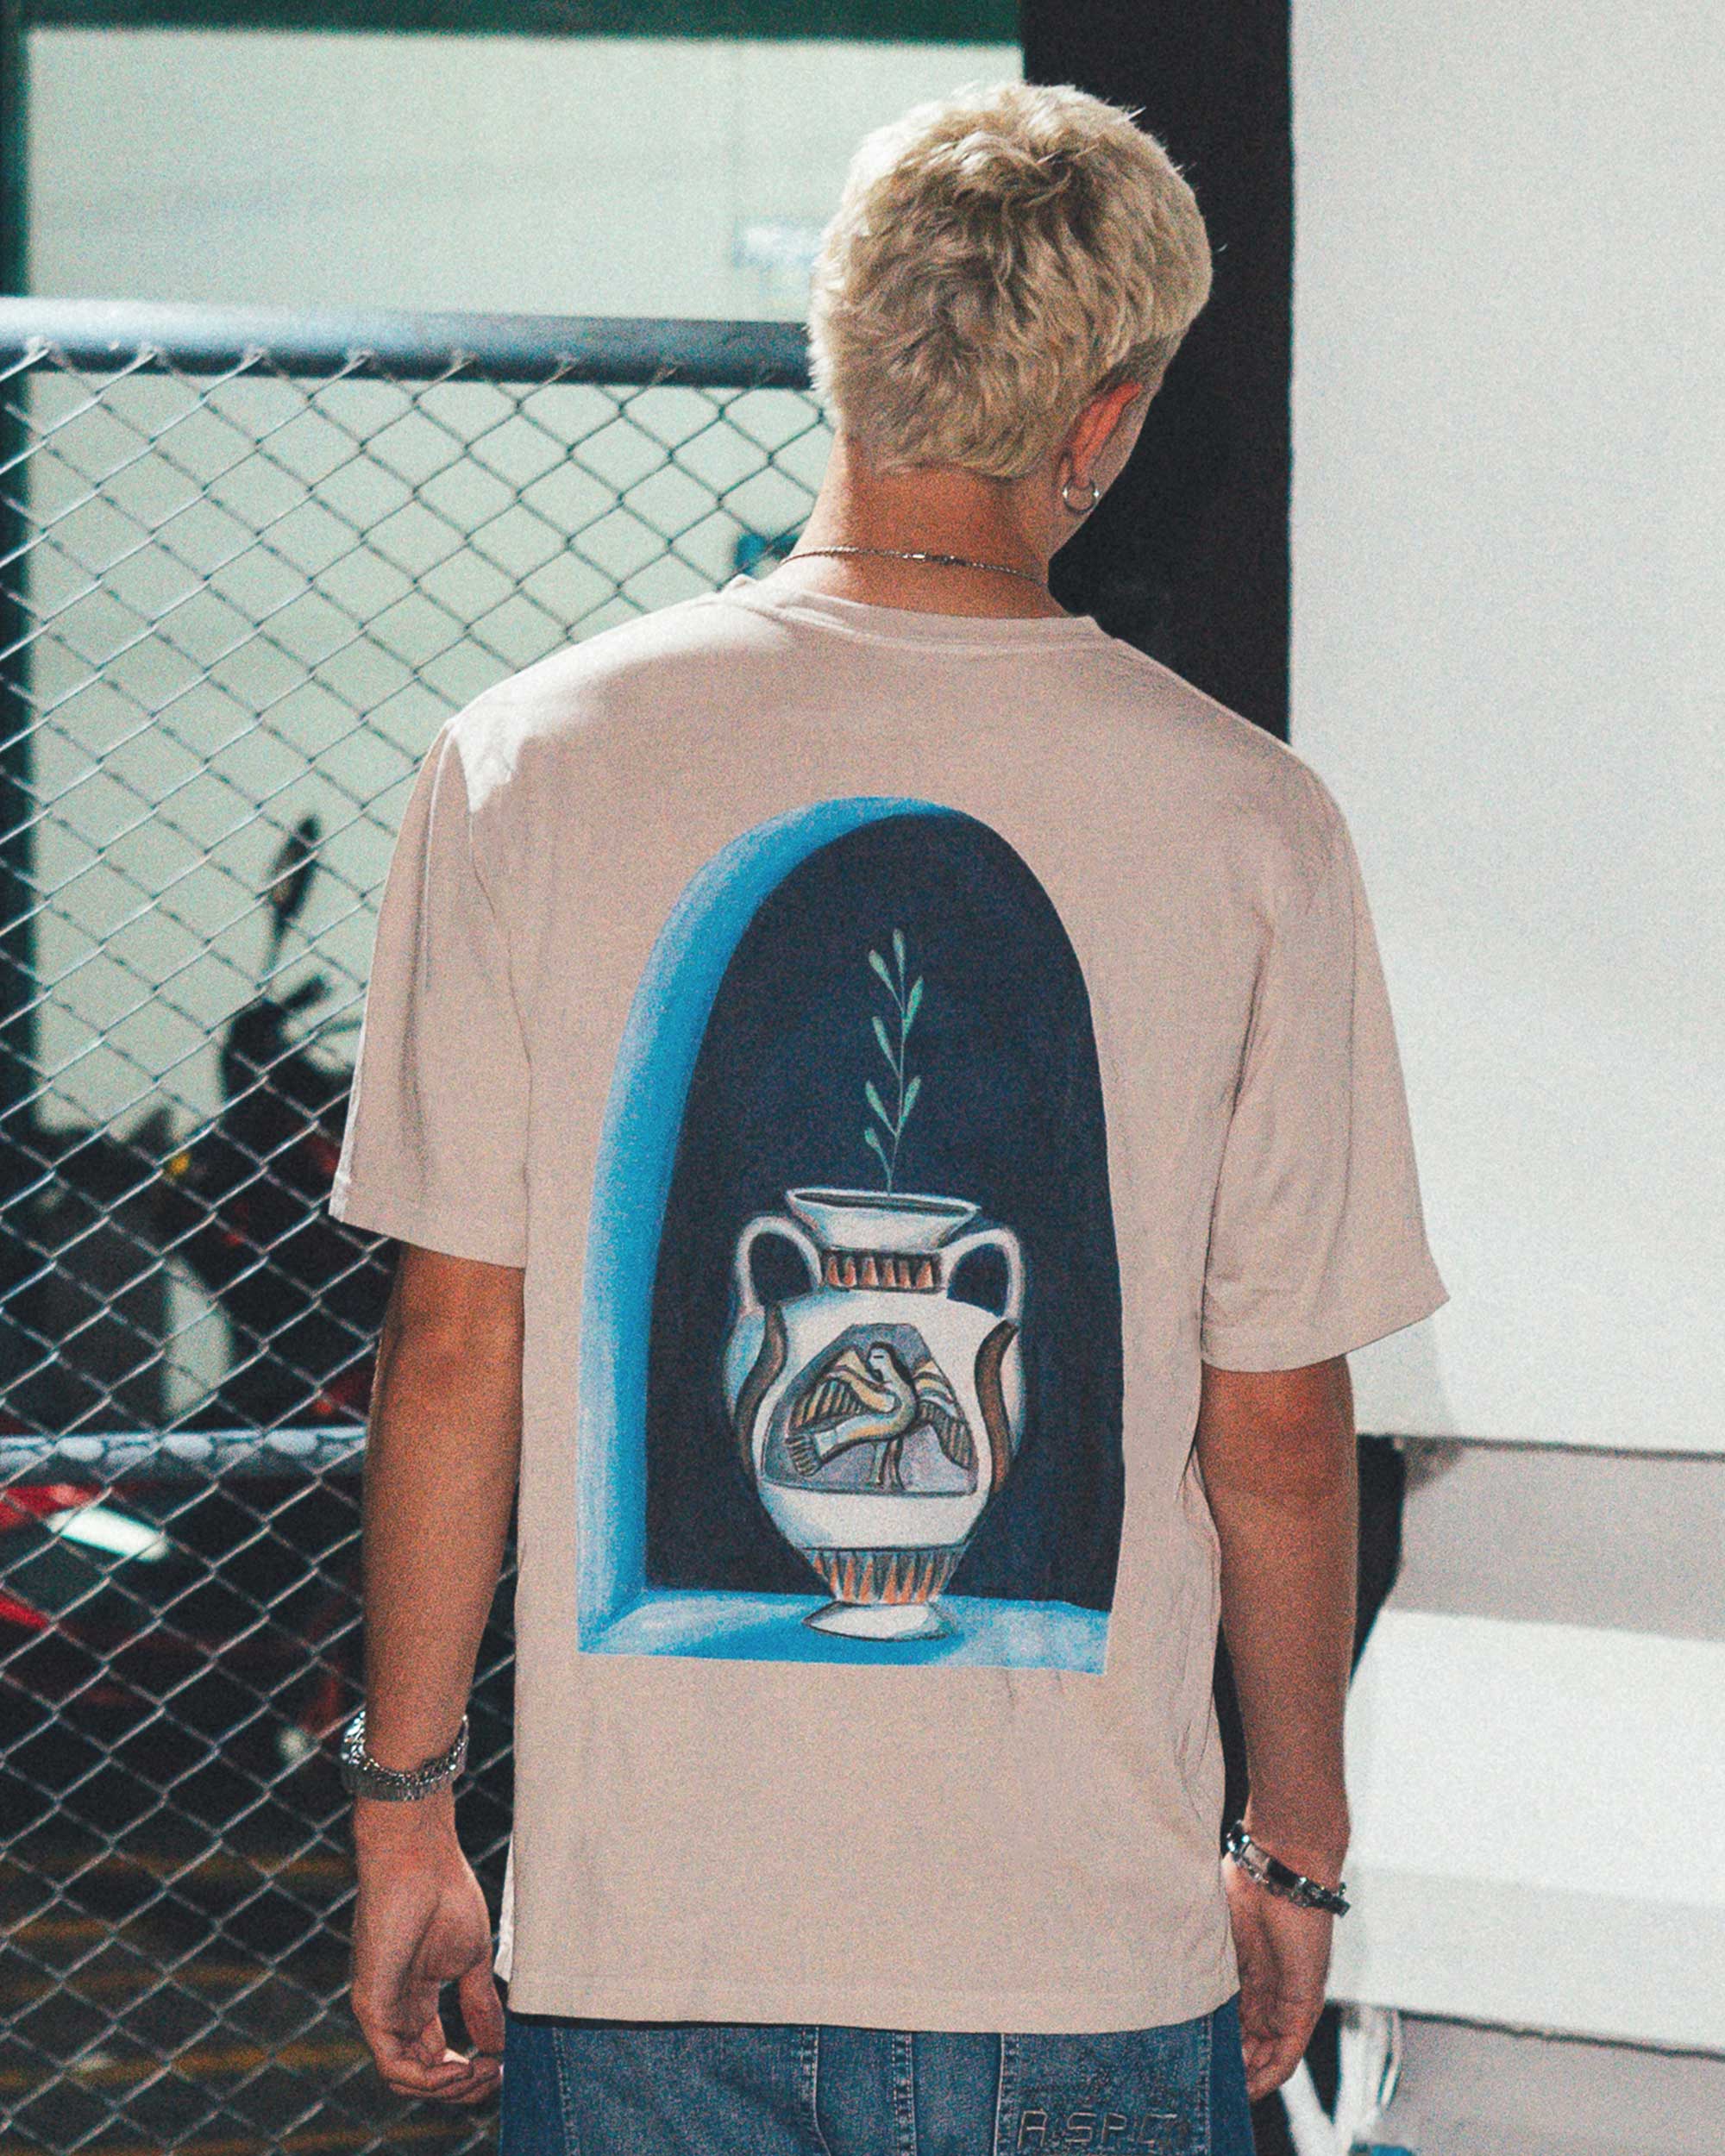 Back view of male model wearing a cream colored t-shirt with a blue vase print.